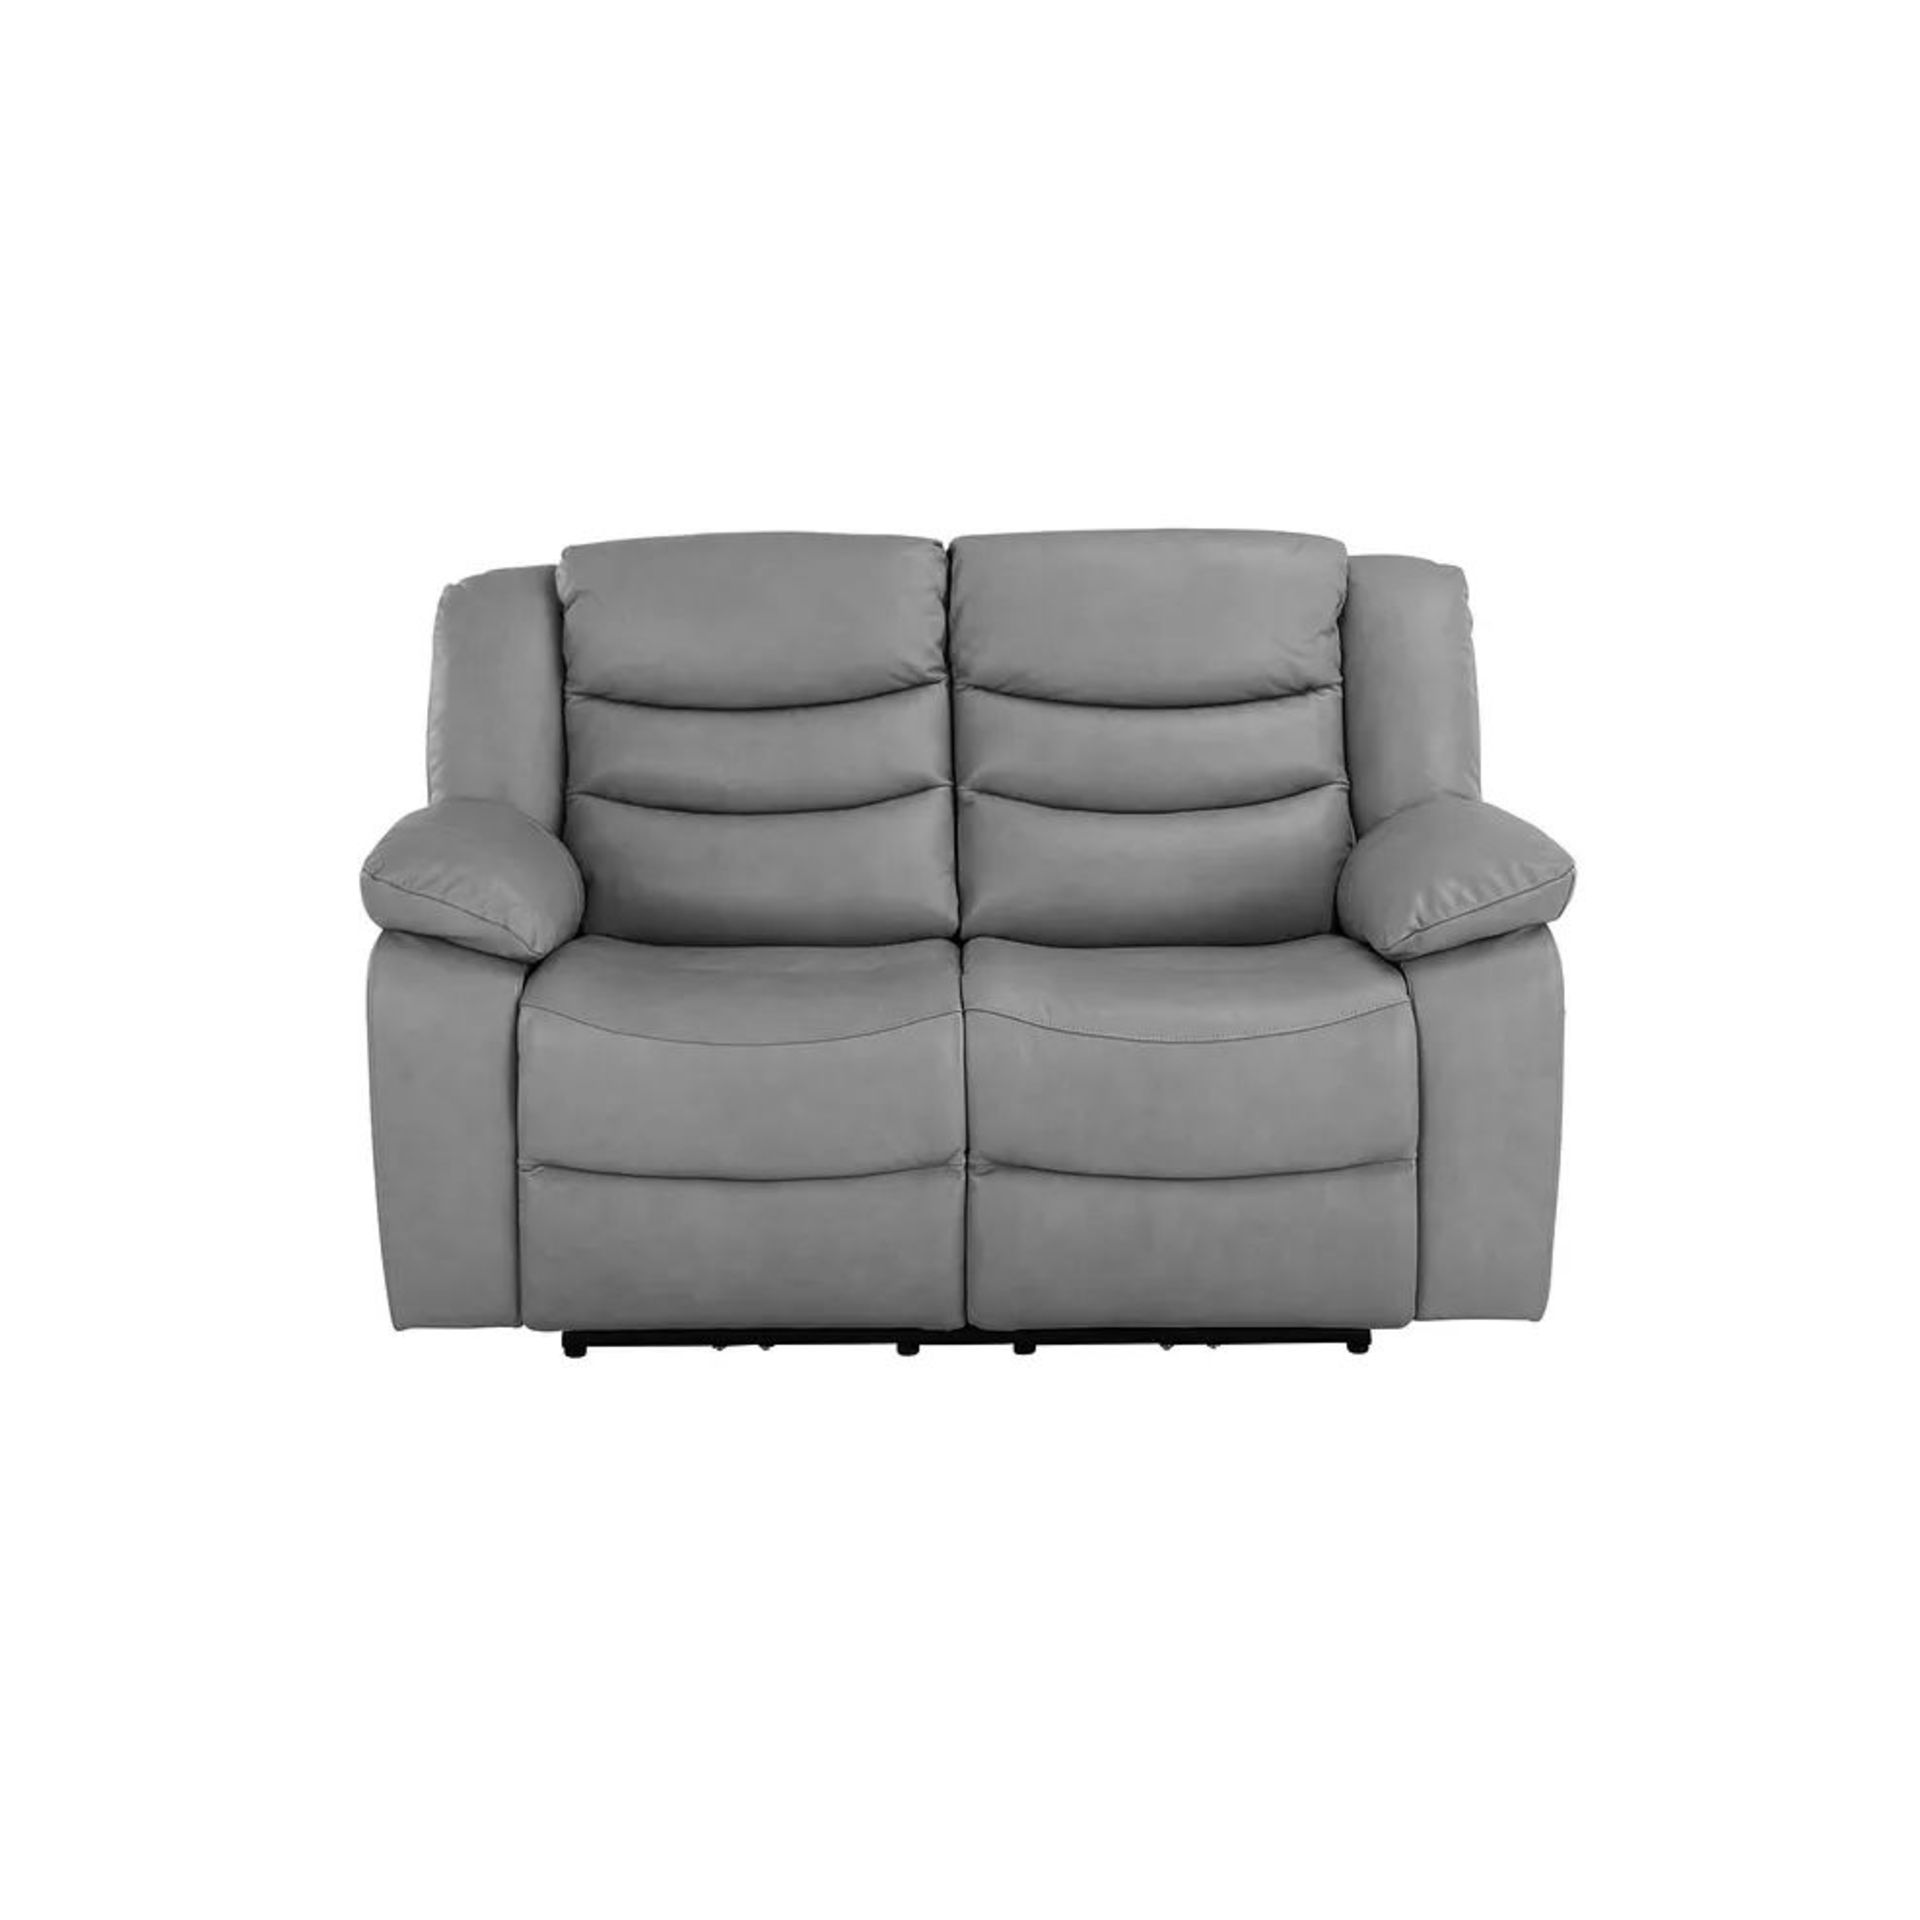 BRAND NEW MARLOW 2 Seater Electric Recliner Sofa - LIGHT GREY LEATHER. RRP £1599. Our Marlow leather - Image 2 of 12